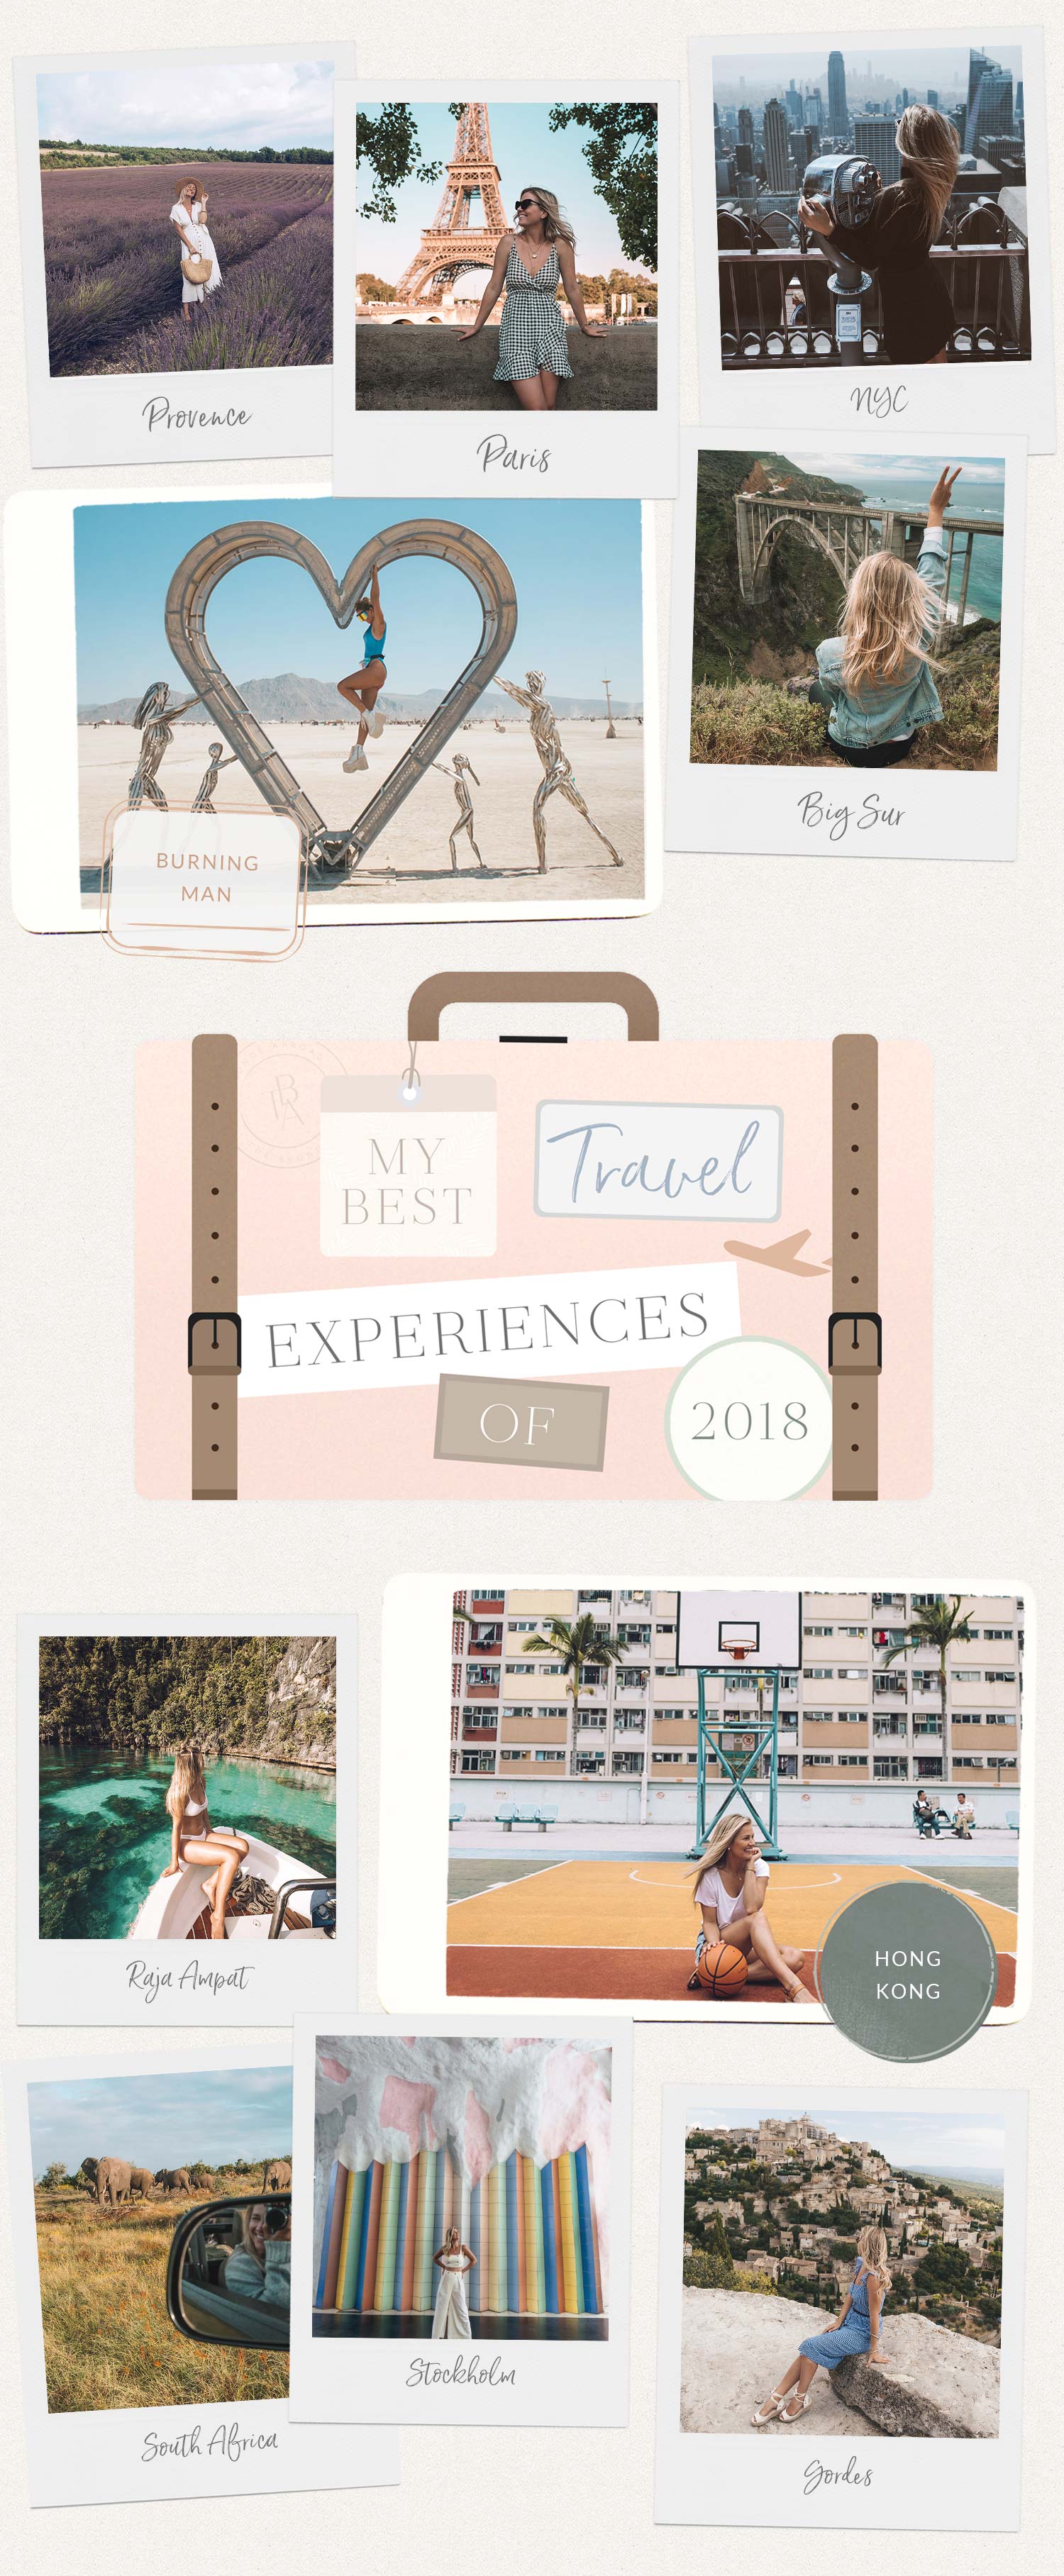 My Best Travel Experiences of 2018